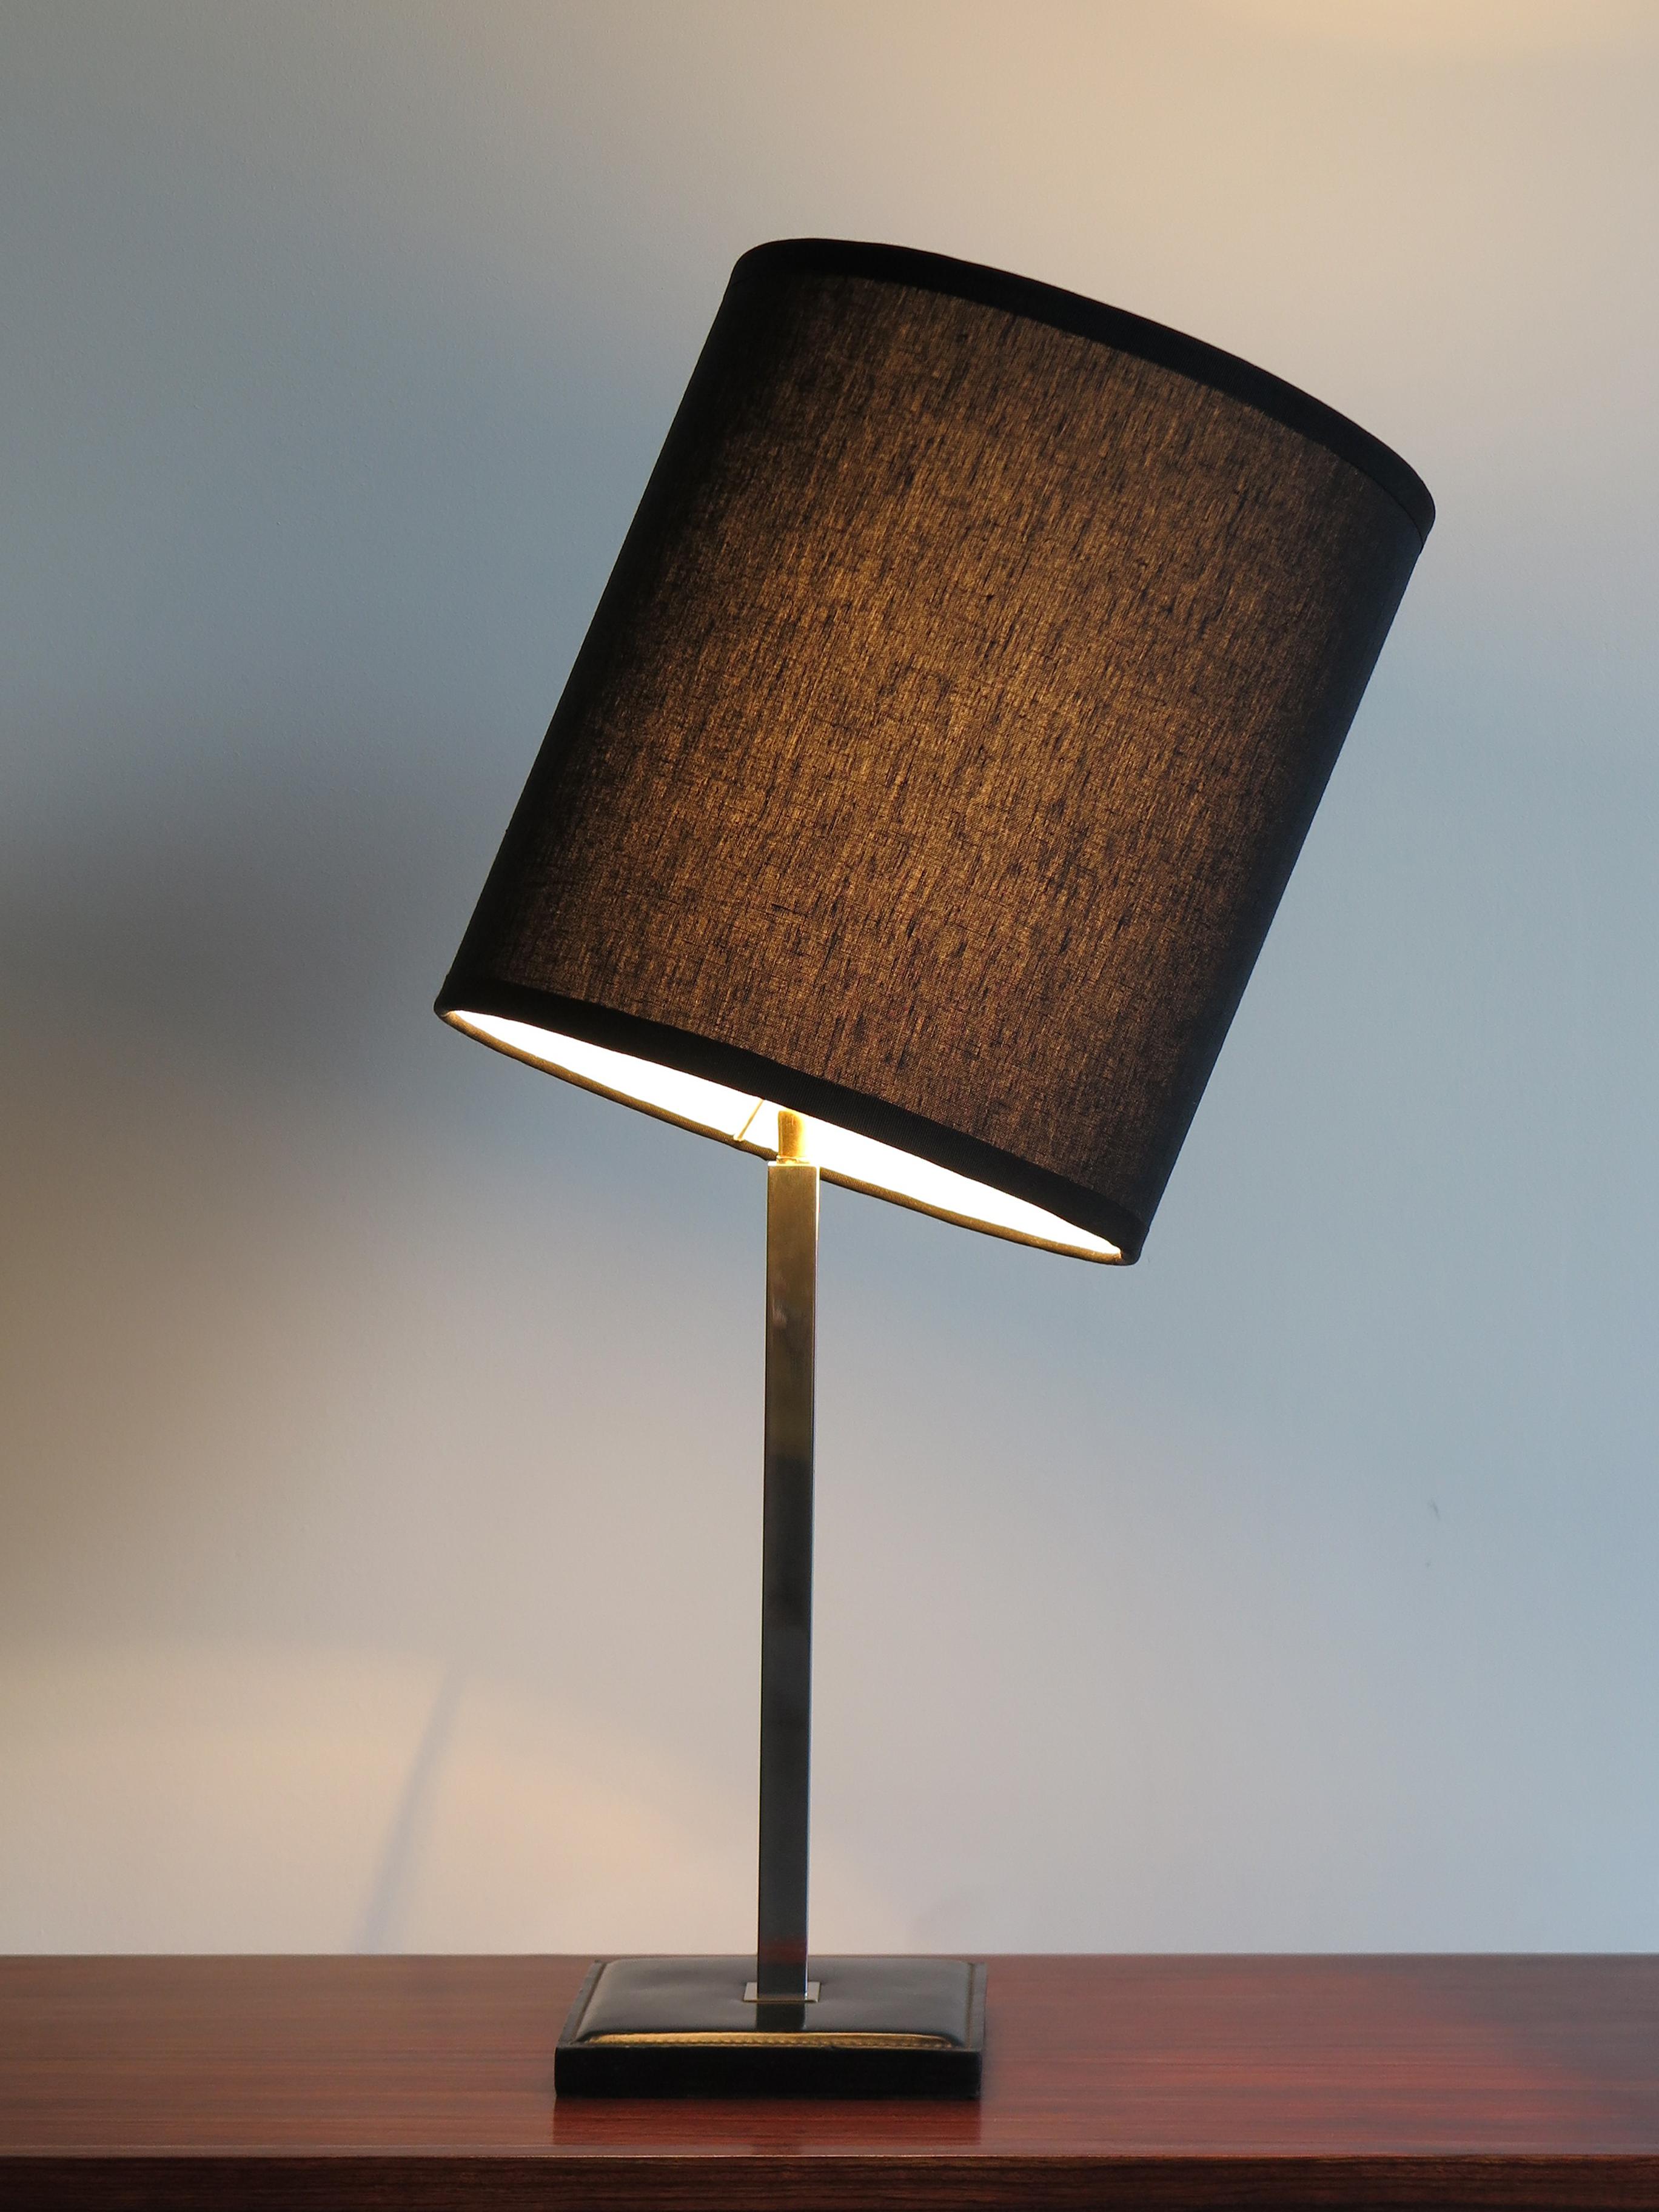 Table lamp designed by Delvaux and manufactured in Belgium with leather base, chromed structure and orientable new black fabric lampshade, circa 1960s
Signature of the producer under the base.

Please note that base and structure are original of